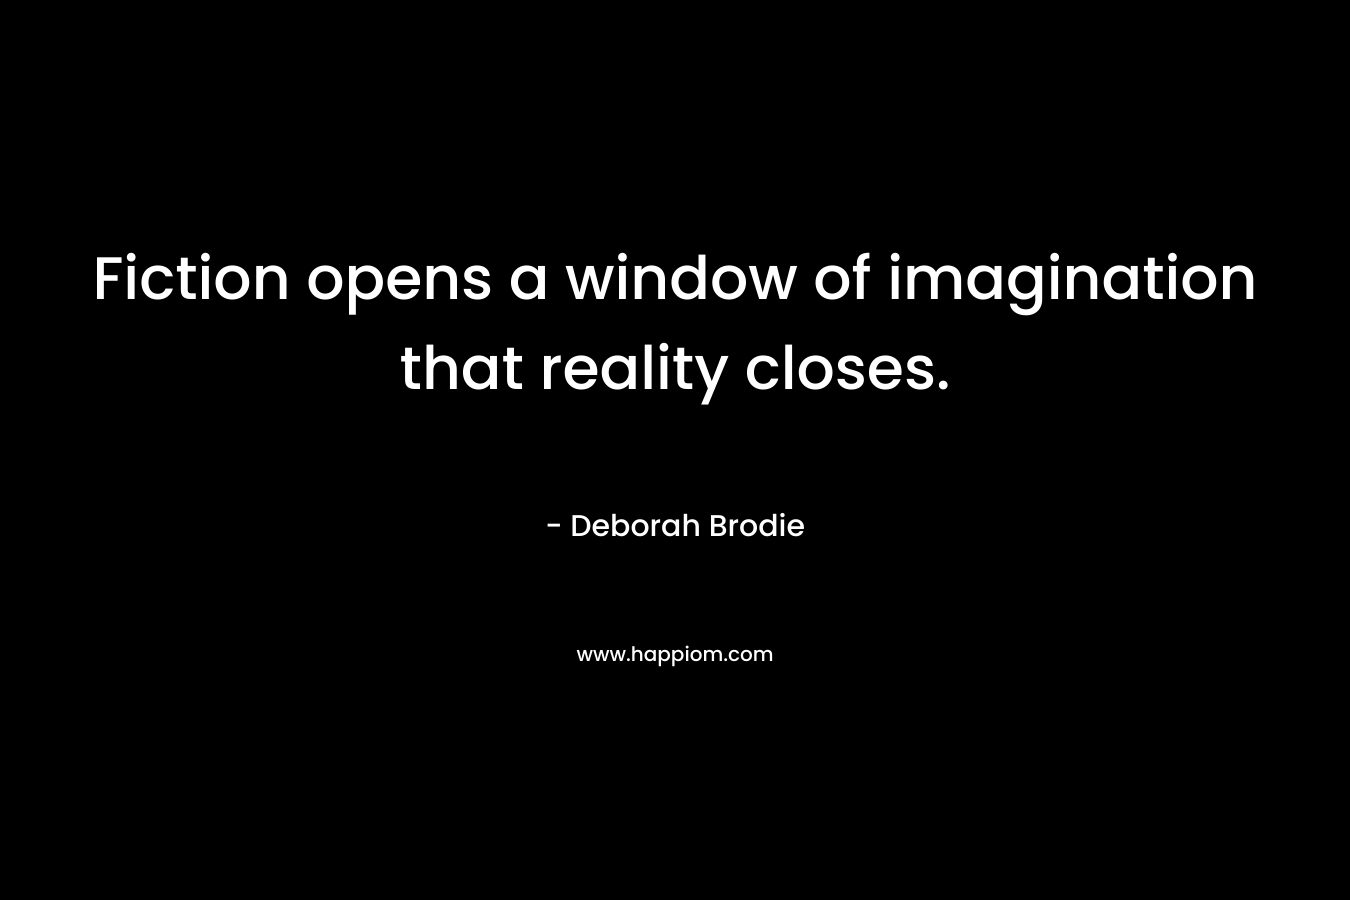 Fiction opens a window of imagination that reality closes.